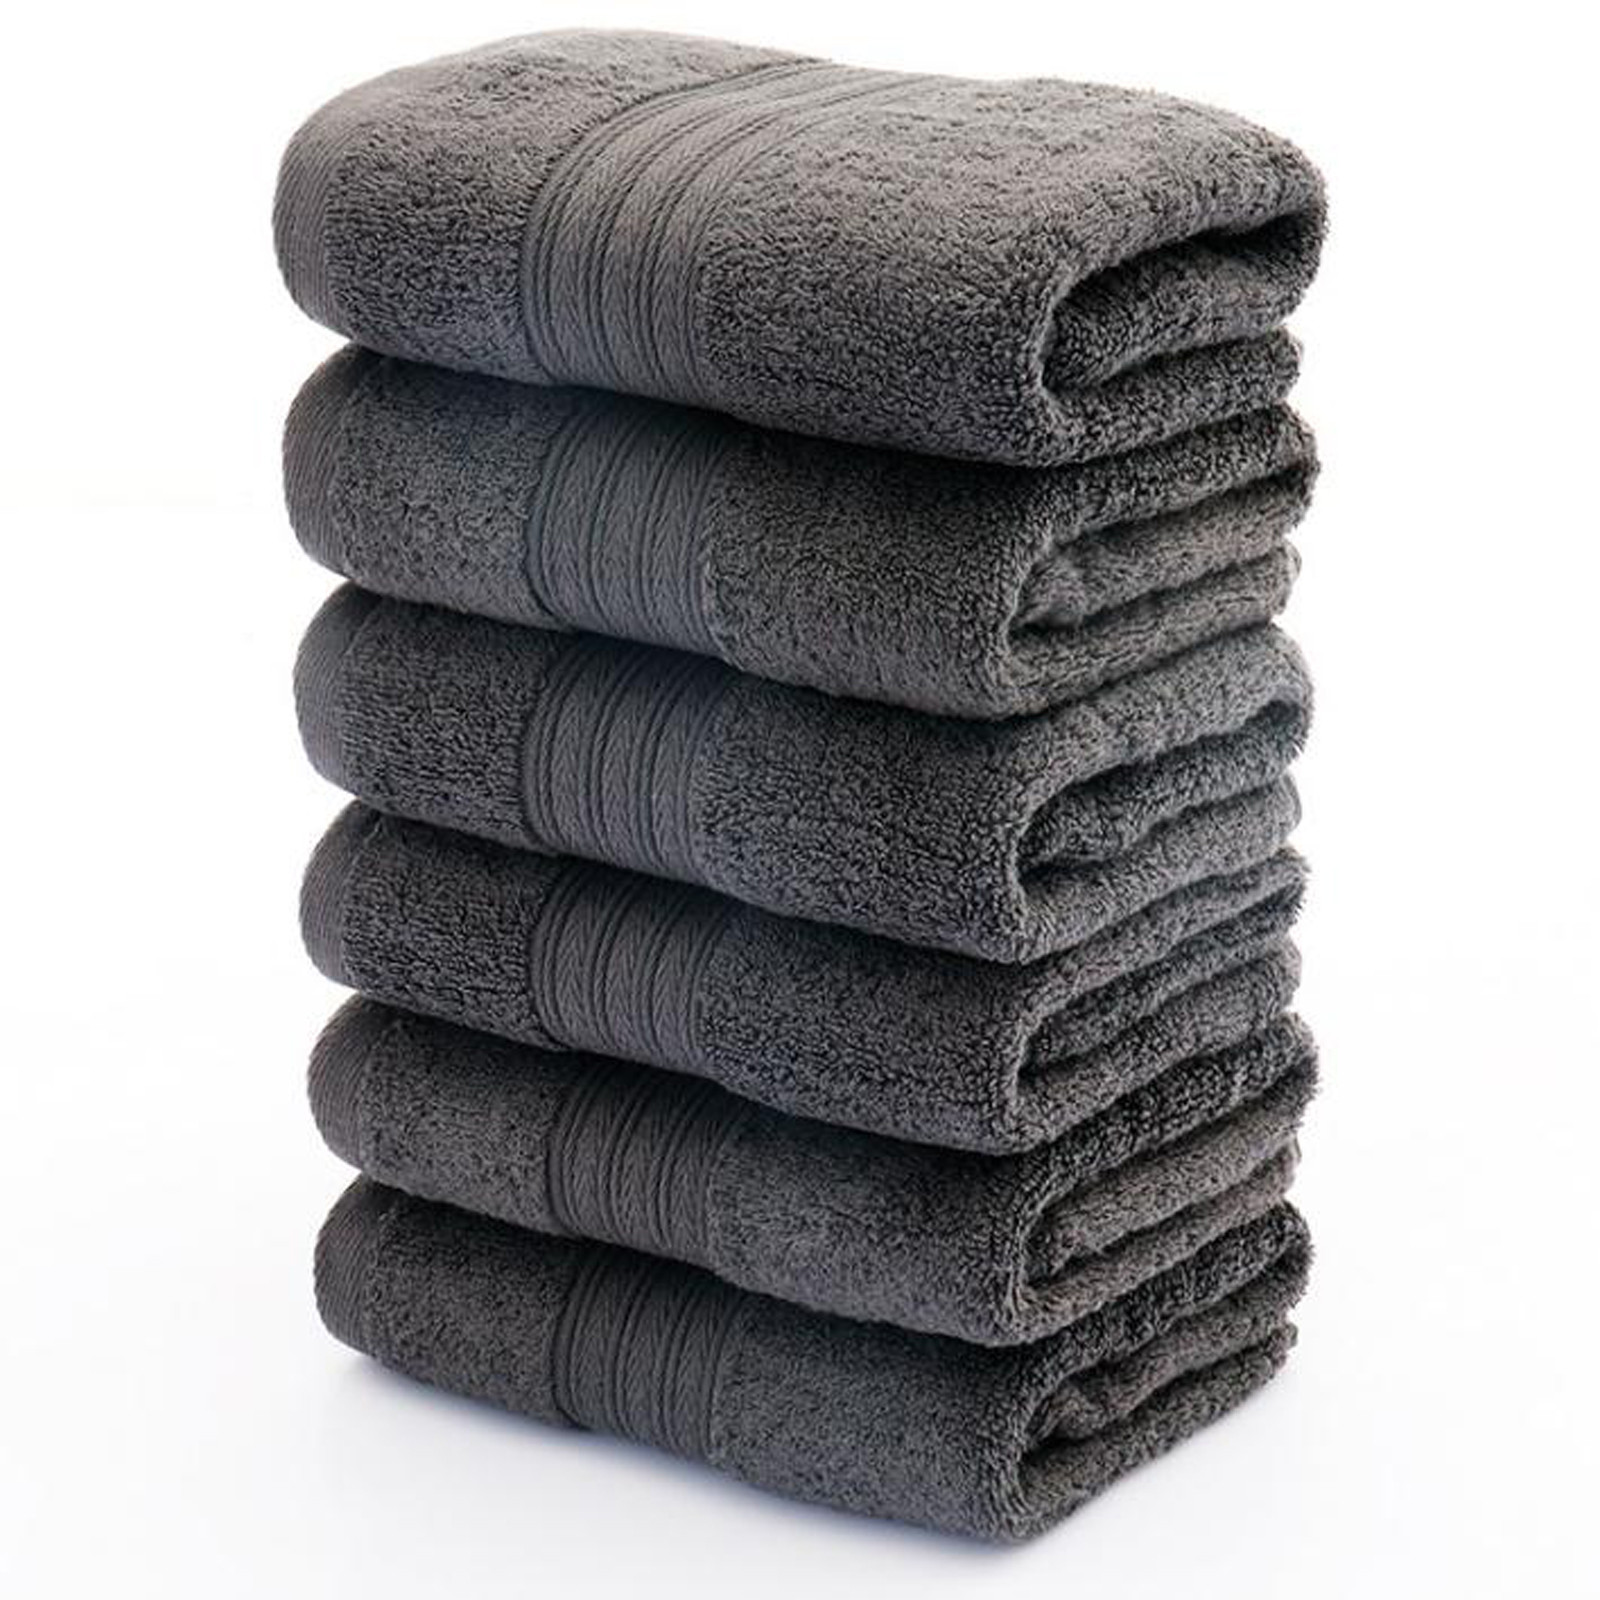 Beppter Home & Garden Bath Towel and Soft Absorbent 6PC Towels Cotton Towels Soft Thick Hand and Absorbent Bathroom Products - image 2 of 4